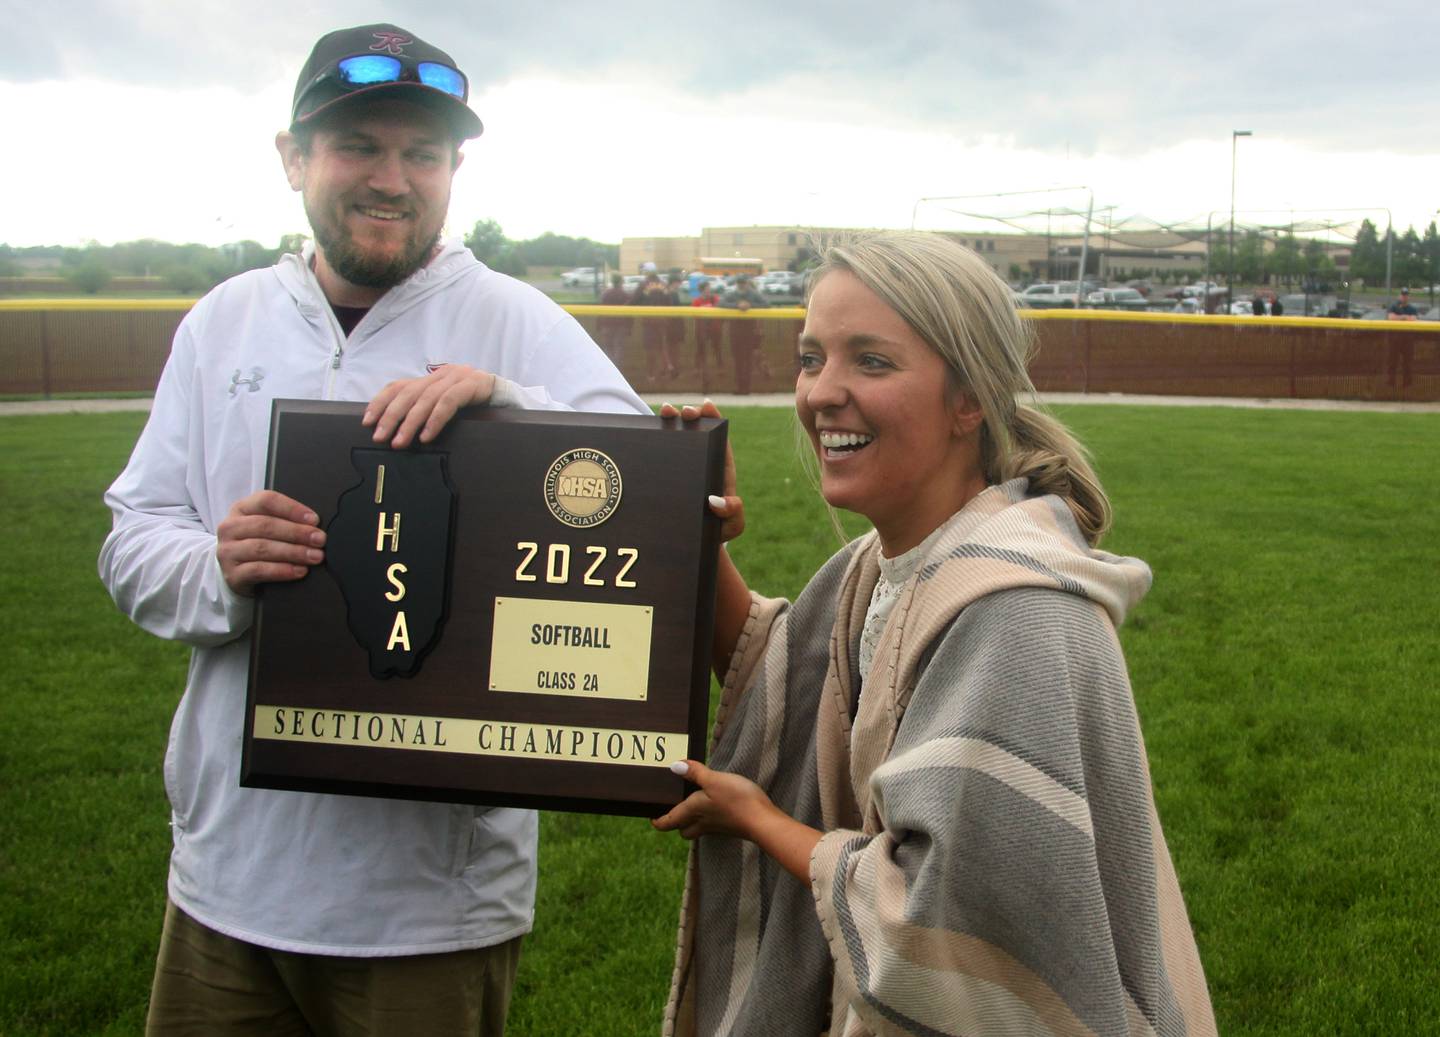 Richmond-Burton’s head coach Tylar Stanton, left, and his fiancee Michelle Serini hoist the hardware after a win over Stillman Valley in softball sectional title game action in Richmond Friday evening.